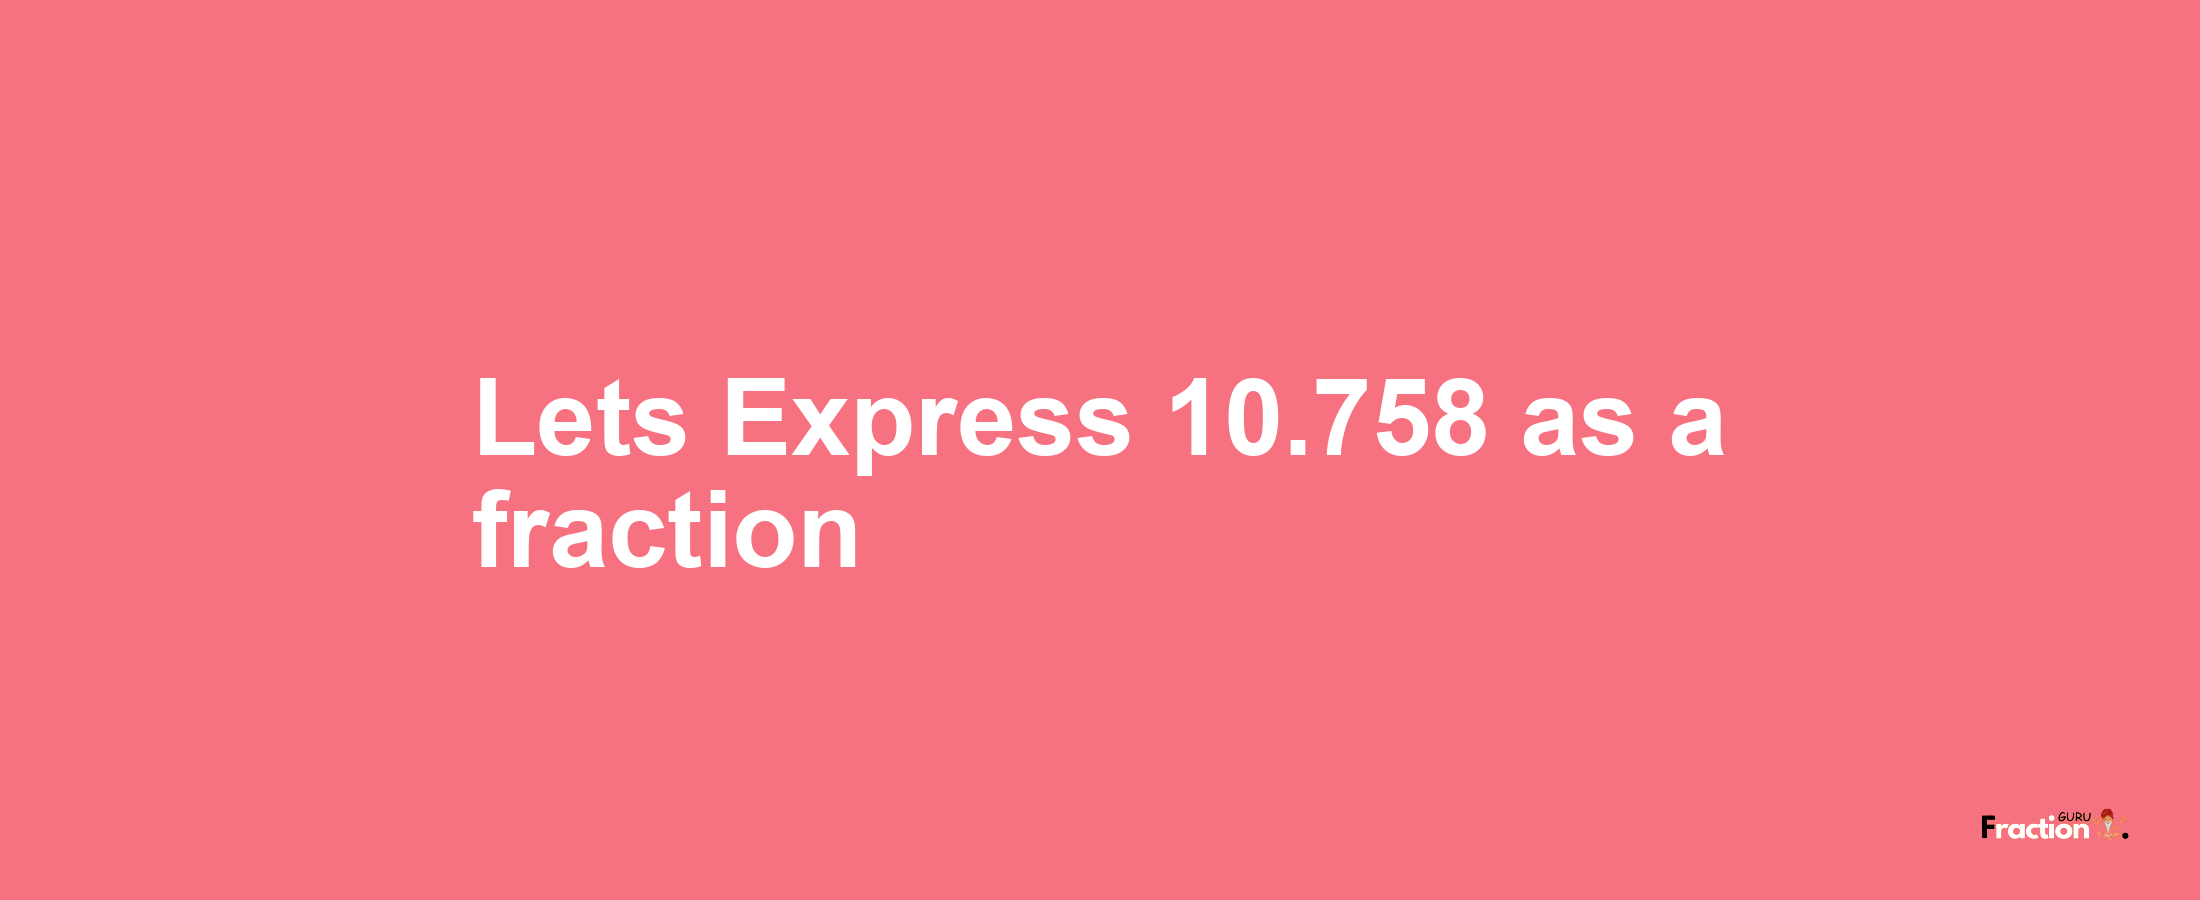 Lets Express 10.758 as afraction